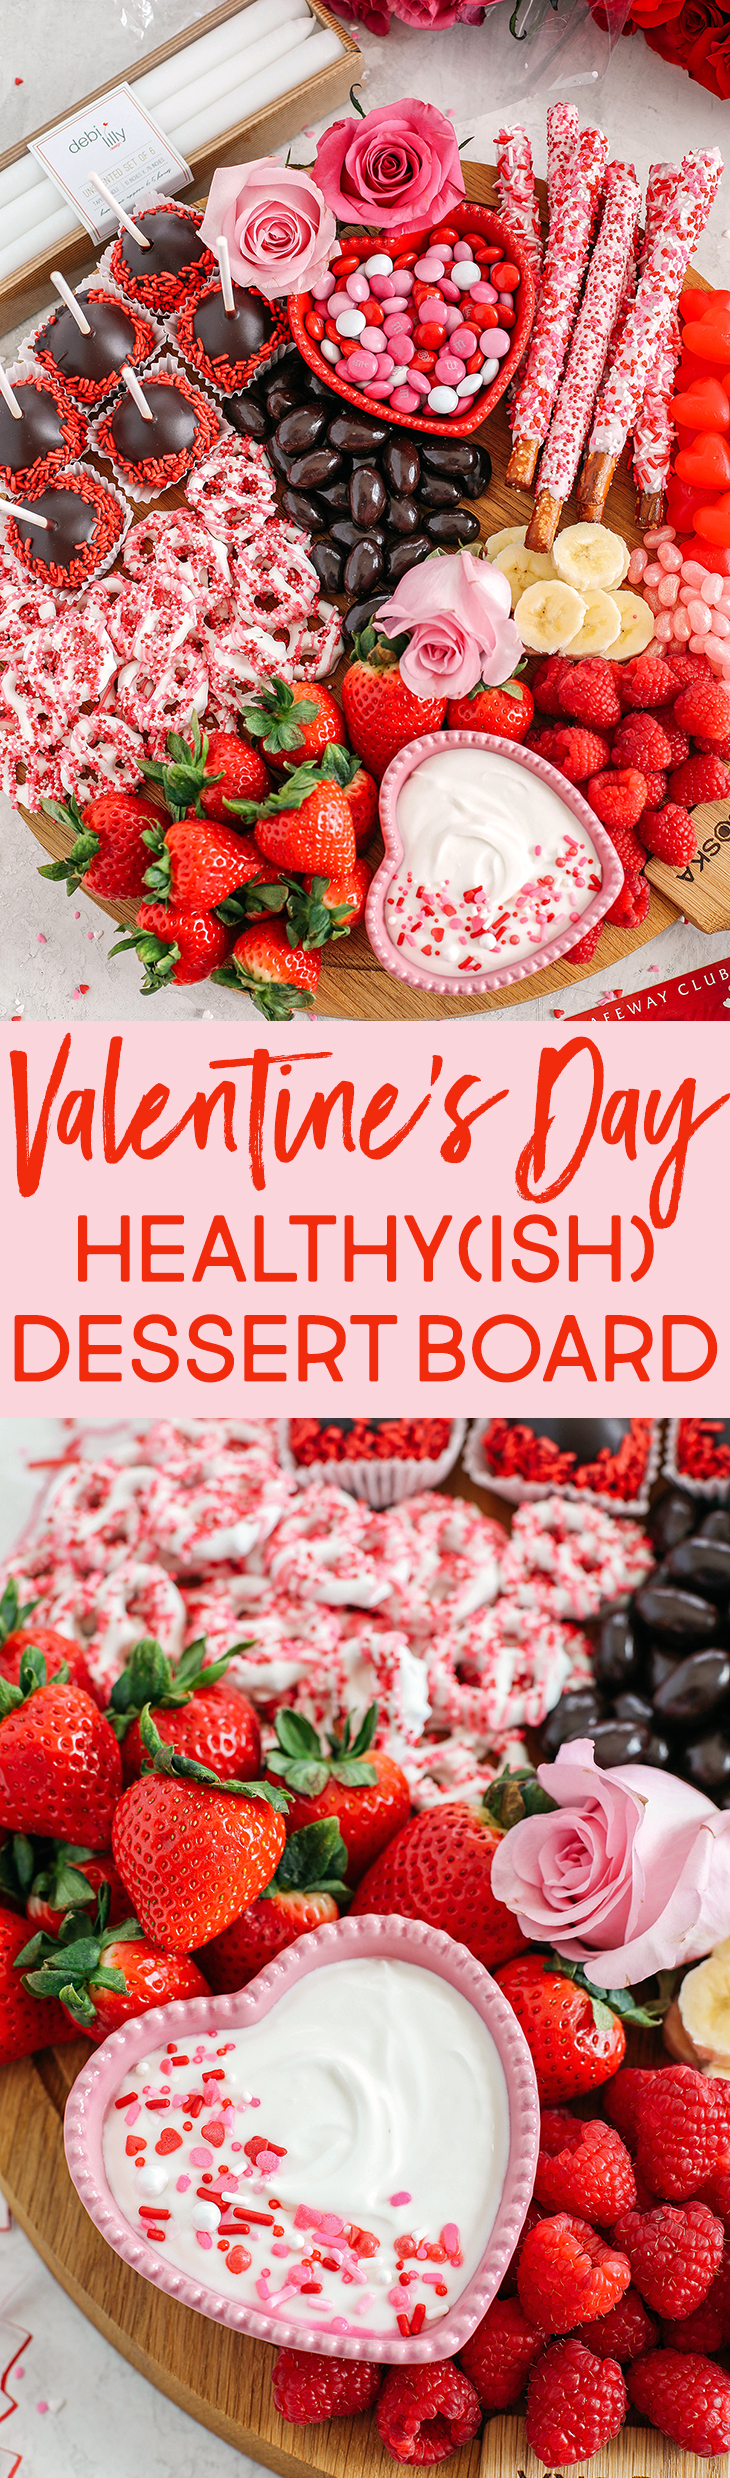 Celebrate Valentine's Day with a fun and festive dessert board made with healthier options like yogurt-dipped pretzels, chocolate covered almonds, fresh fruit and a honey yogurt dipping sauce!